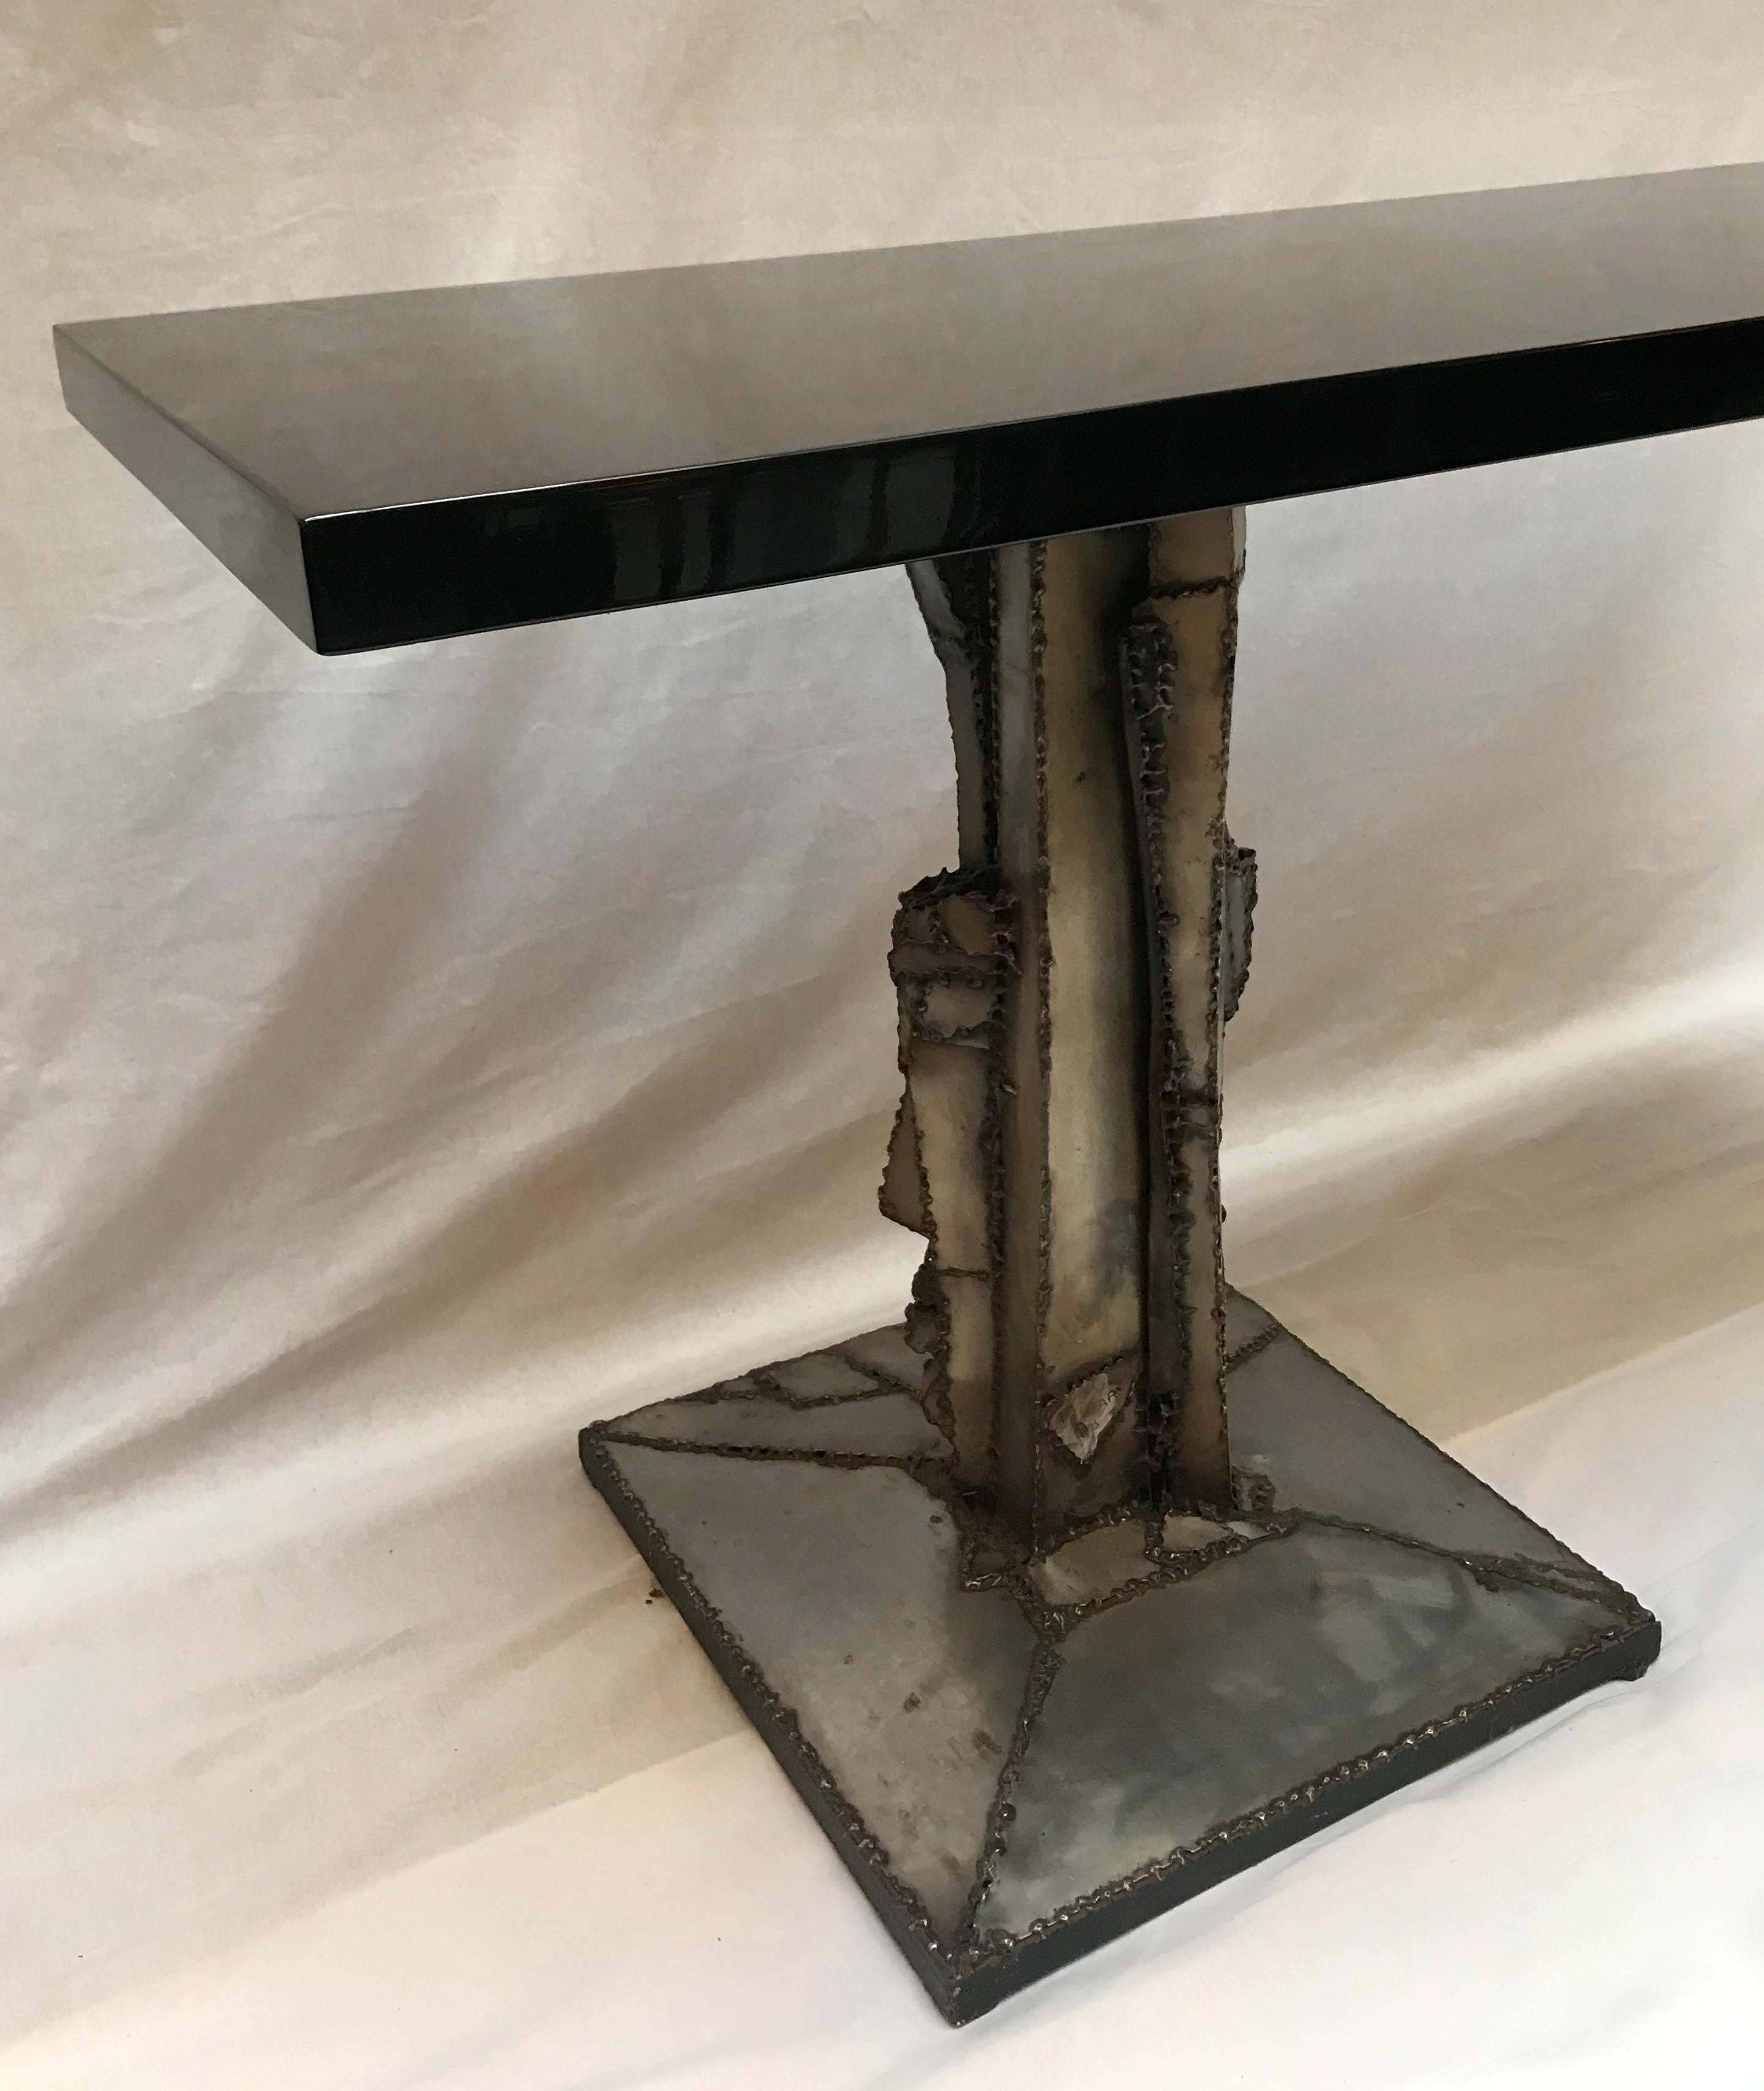 Brutalist and sculptural console table by Jacques Versari, 1983

With a black lacquered wooden top.

Signed below 